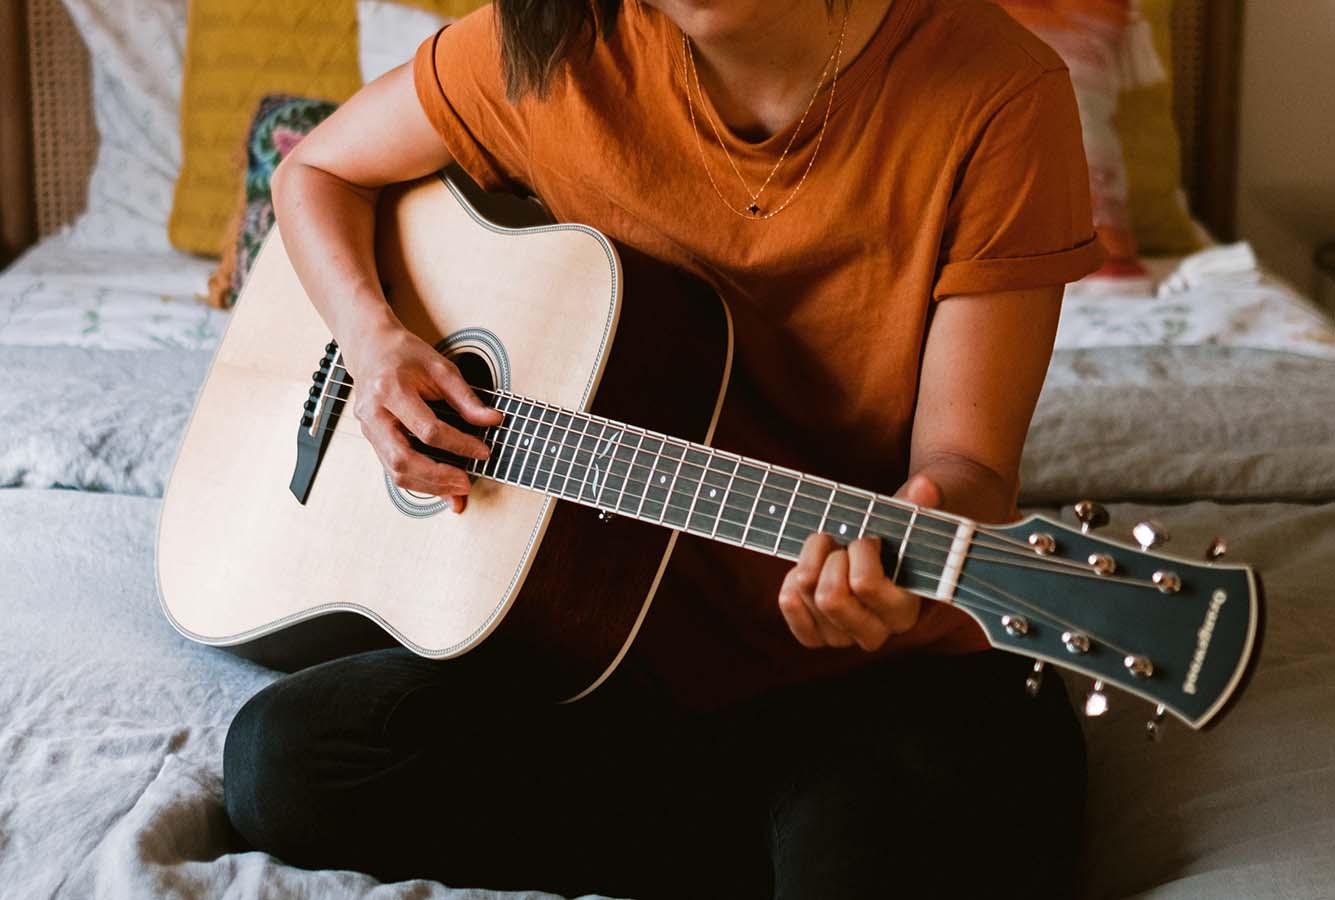 How to Record Guitar: 5 Tips to Sound Like a Pro